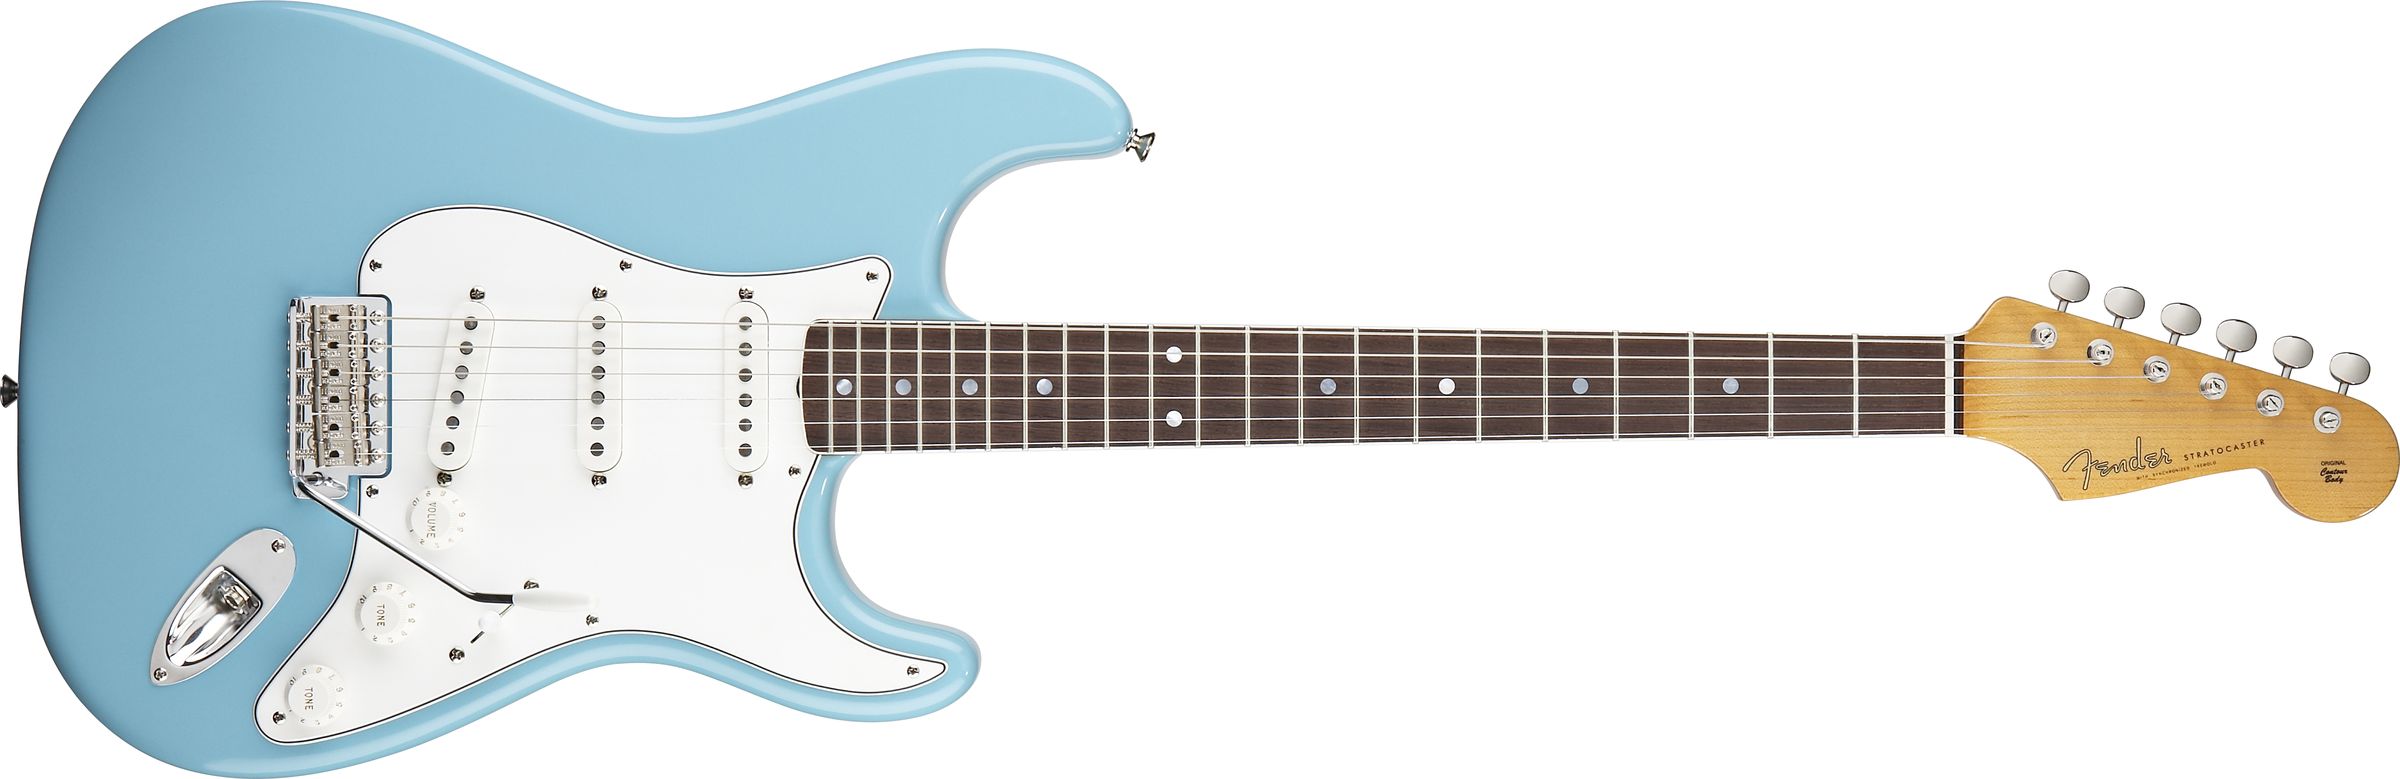 GUITARRA FENDER SIG SERIES ERIC JOHNSON STRATOCASTER 011-7700-897 TROPICAL TURQUOISE